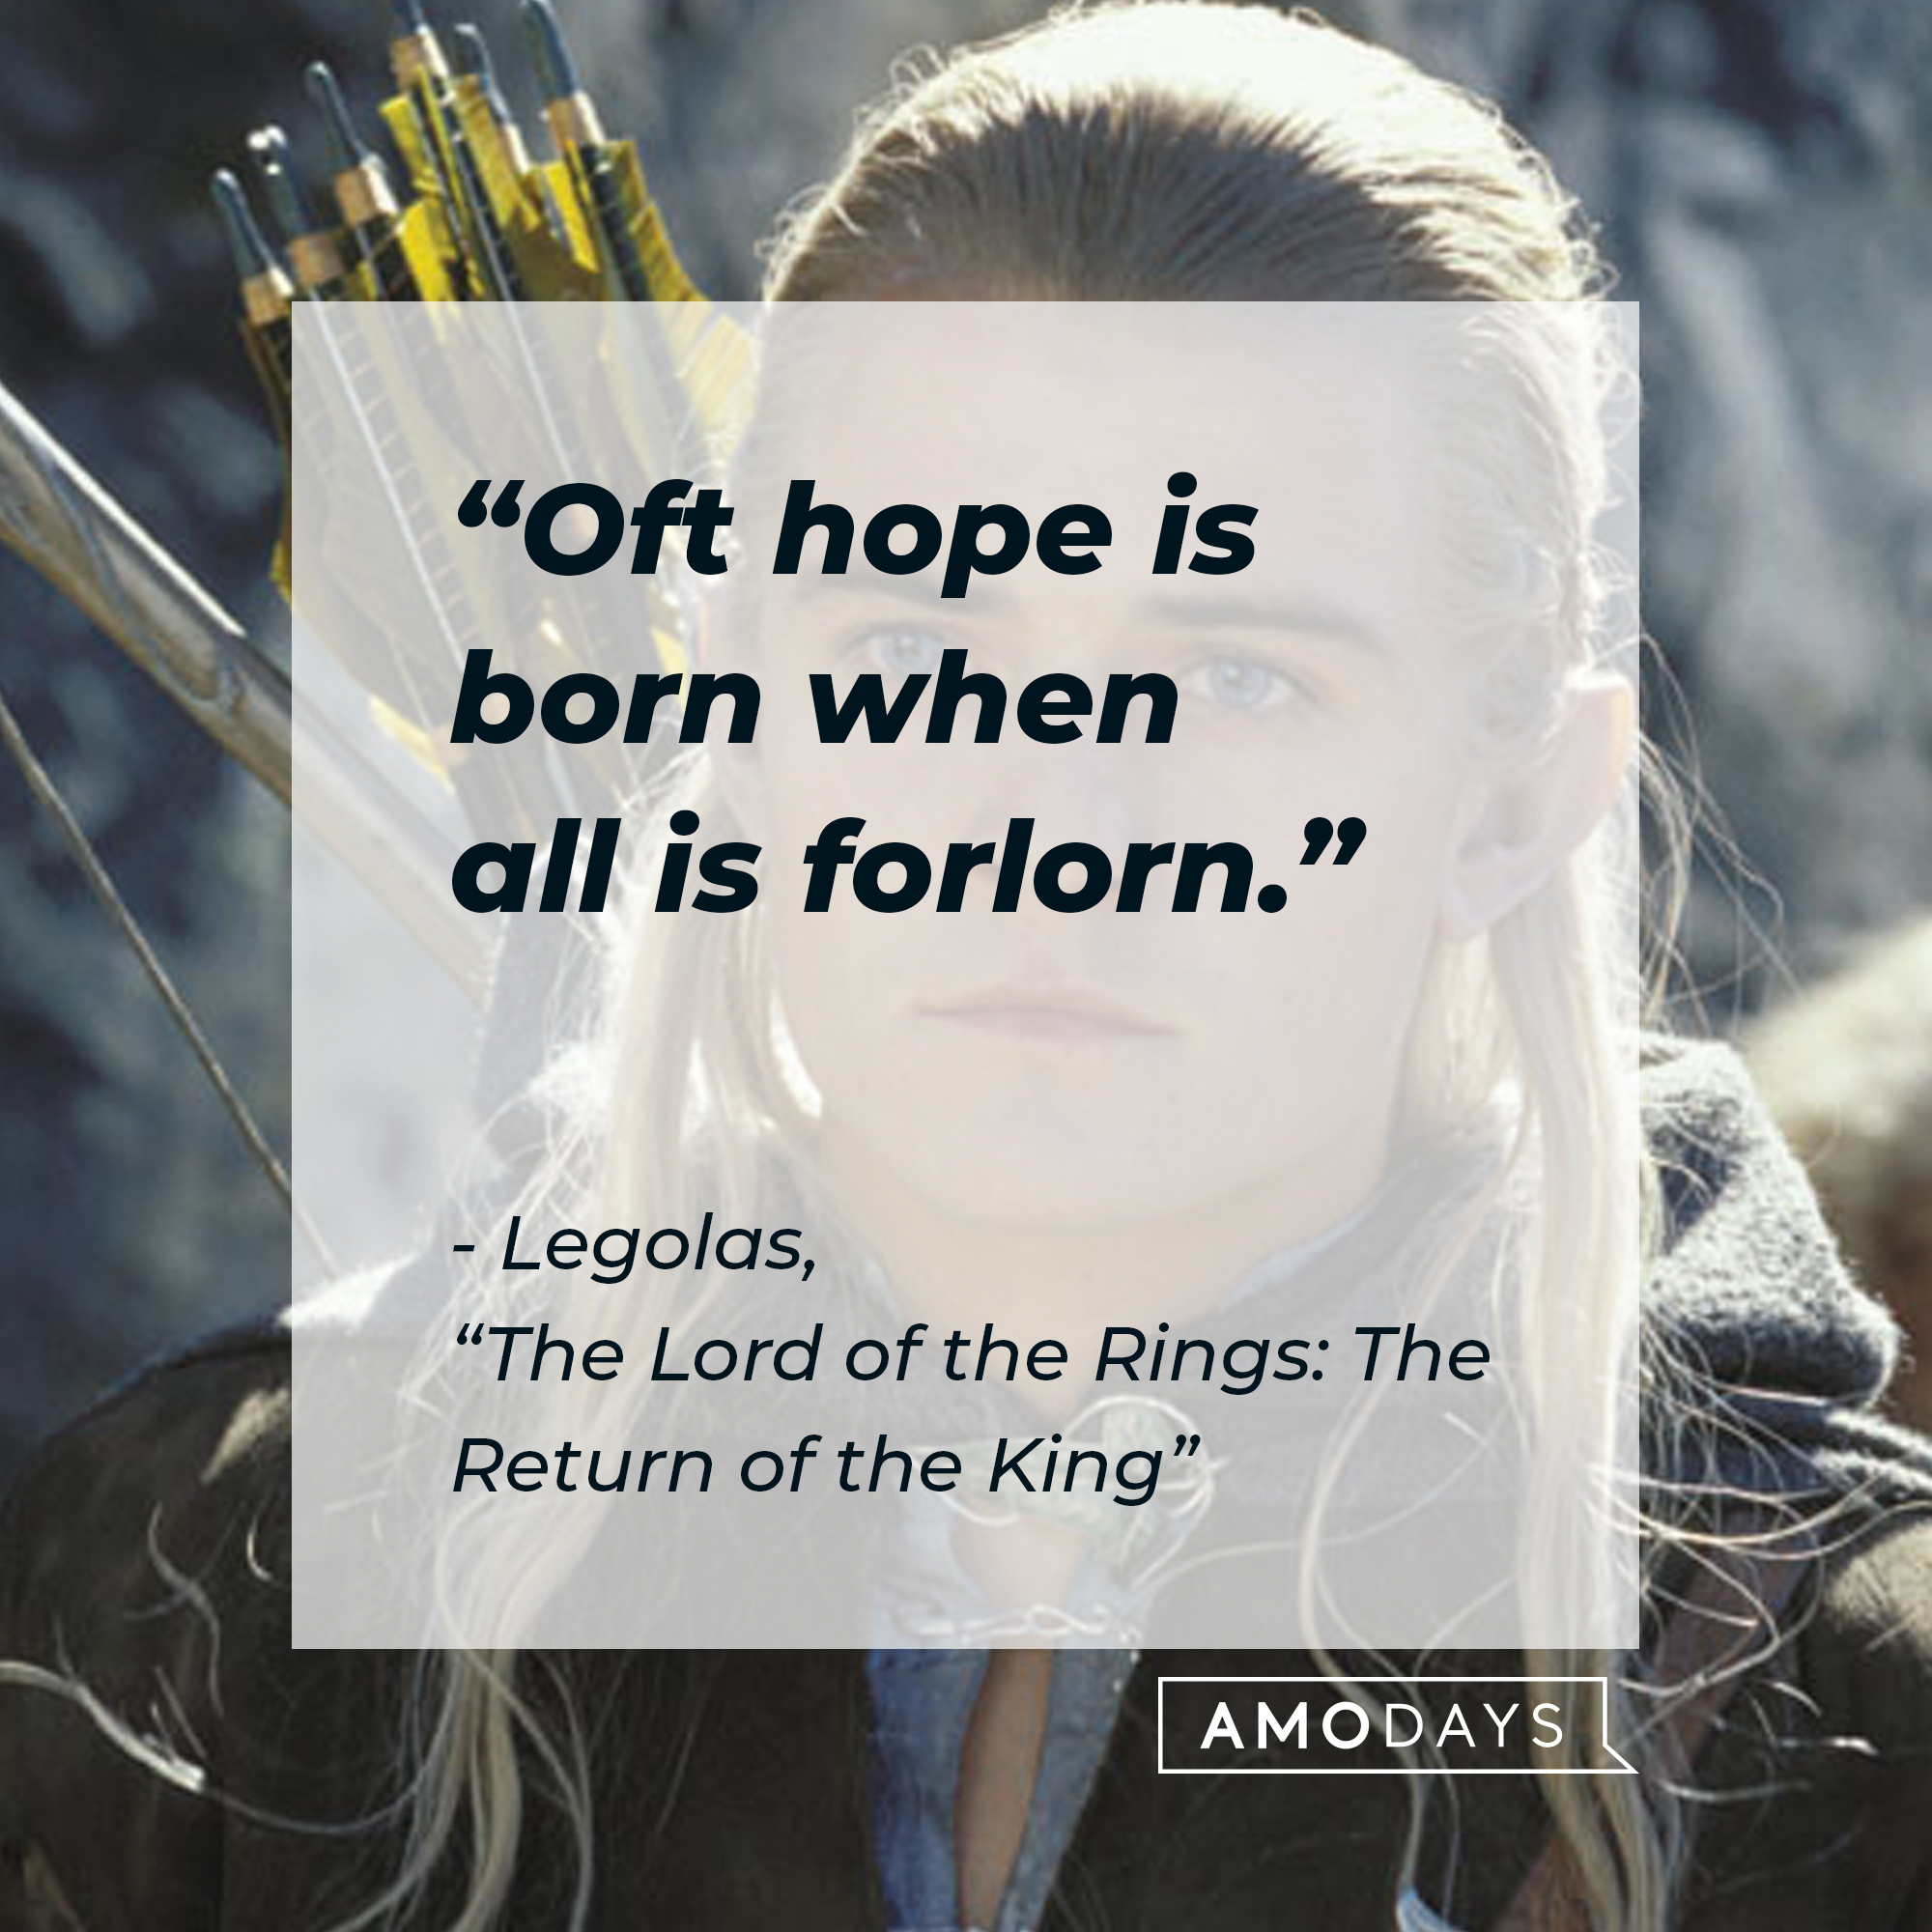 Legolas with his quote: "Oft hope is born when all is forlorn."  | Source: Facebook.com/lordoftheringstrilogy